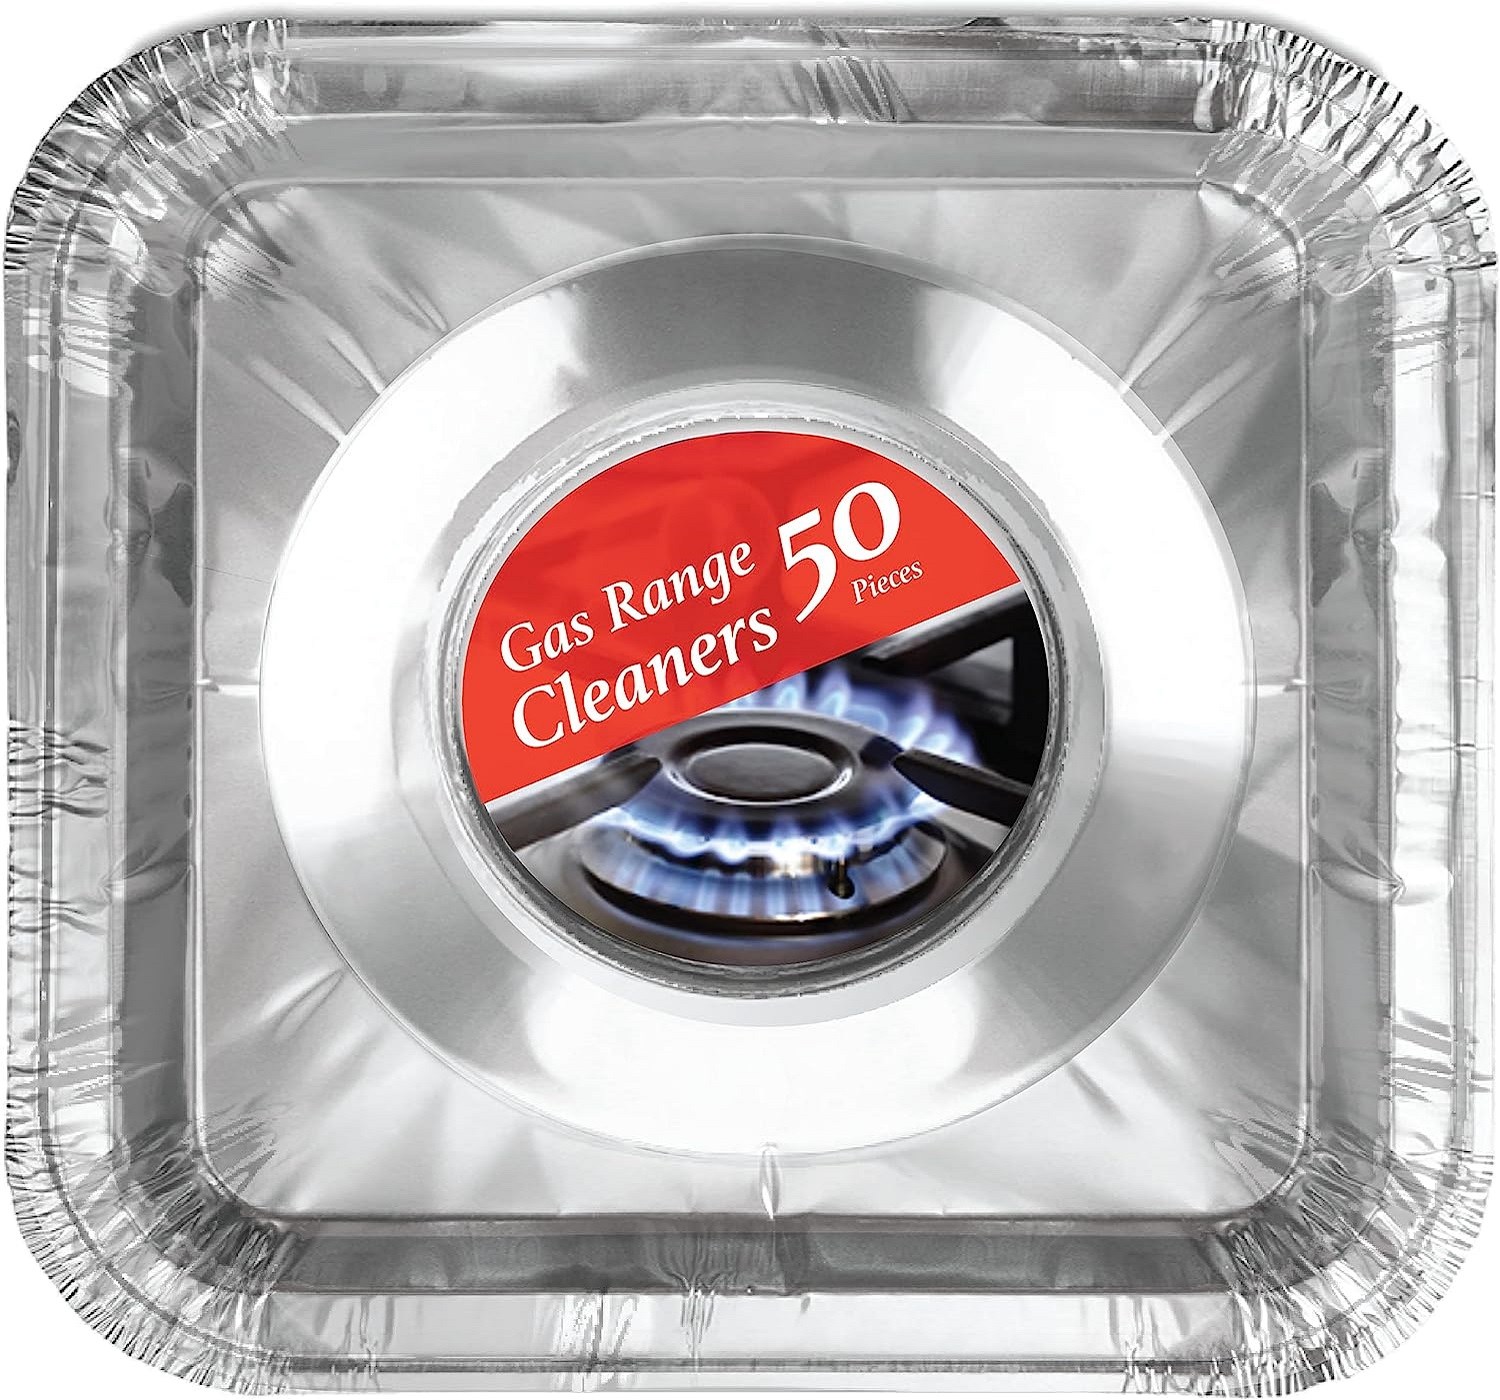 Electric Stove Burner Covers (50 Pack) - Electric Stove Bib Liners